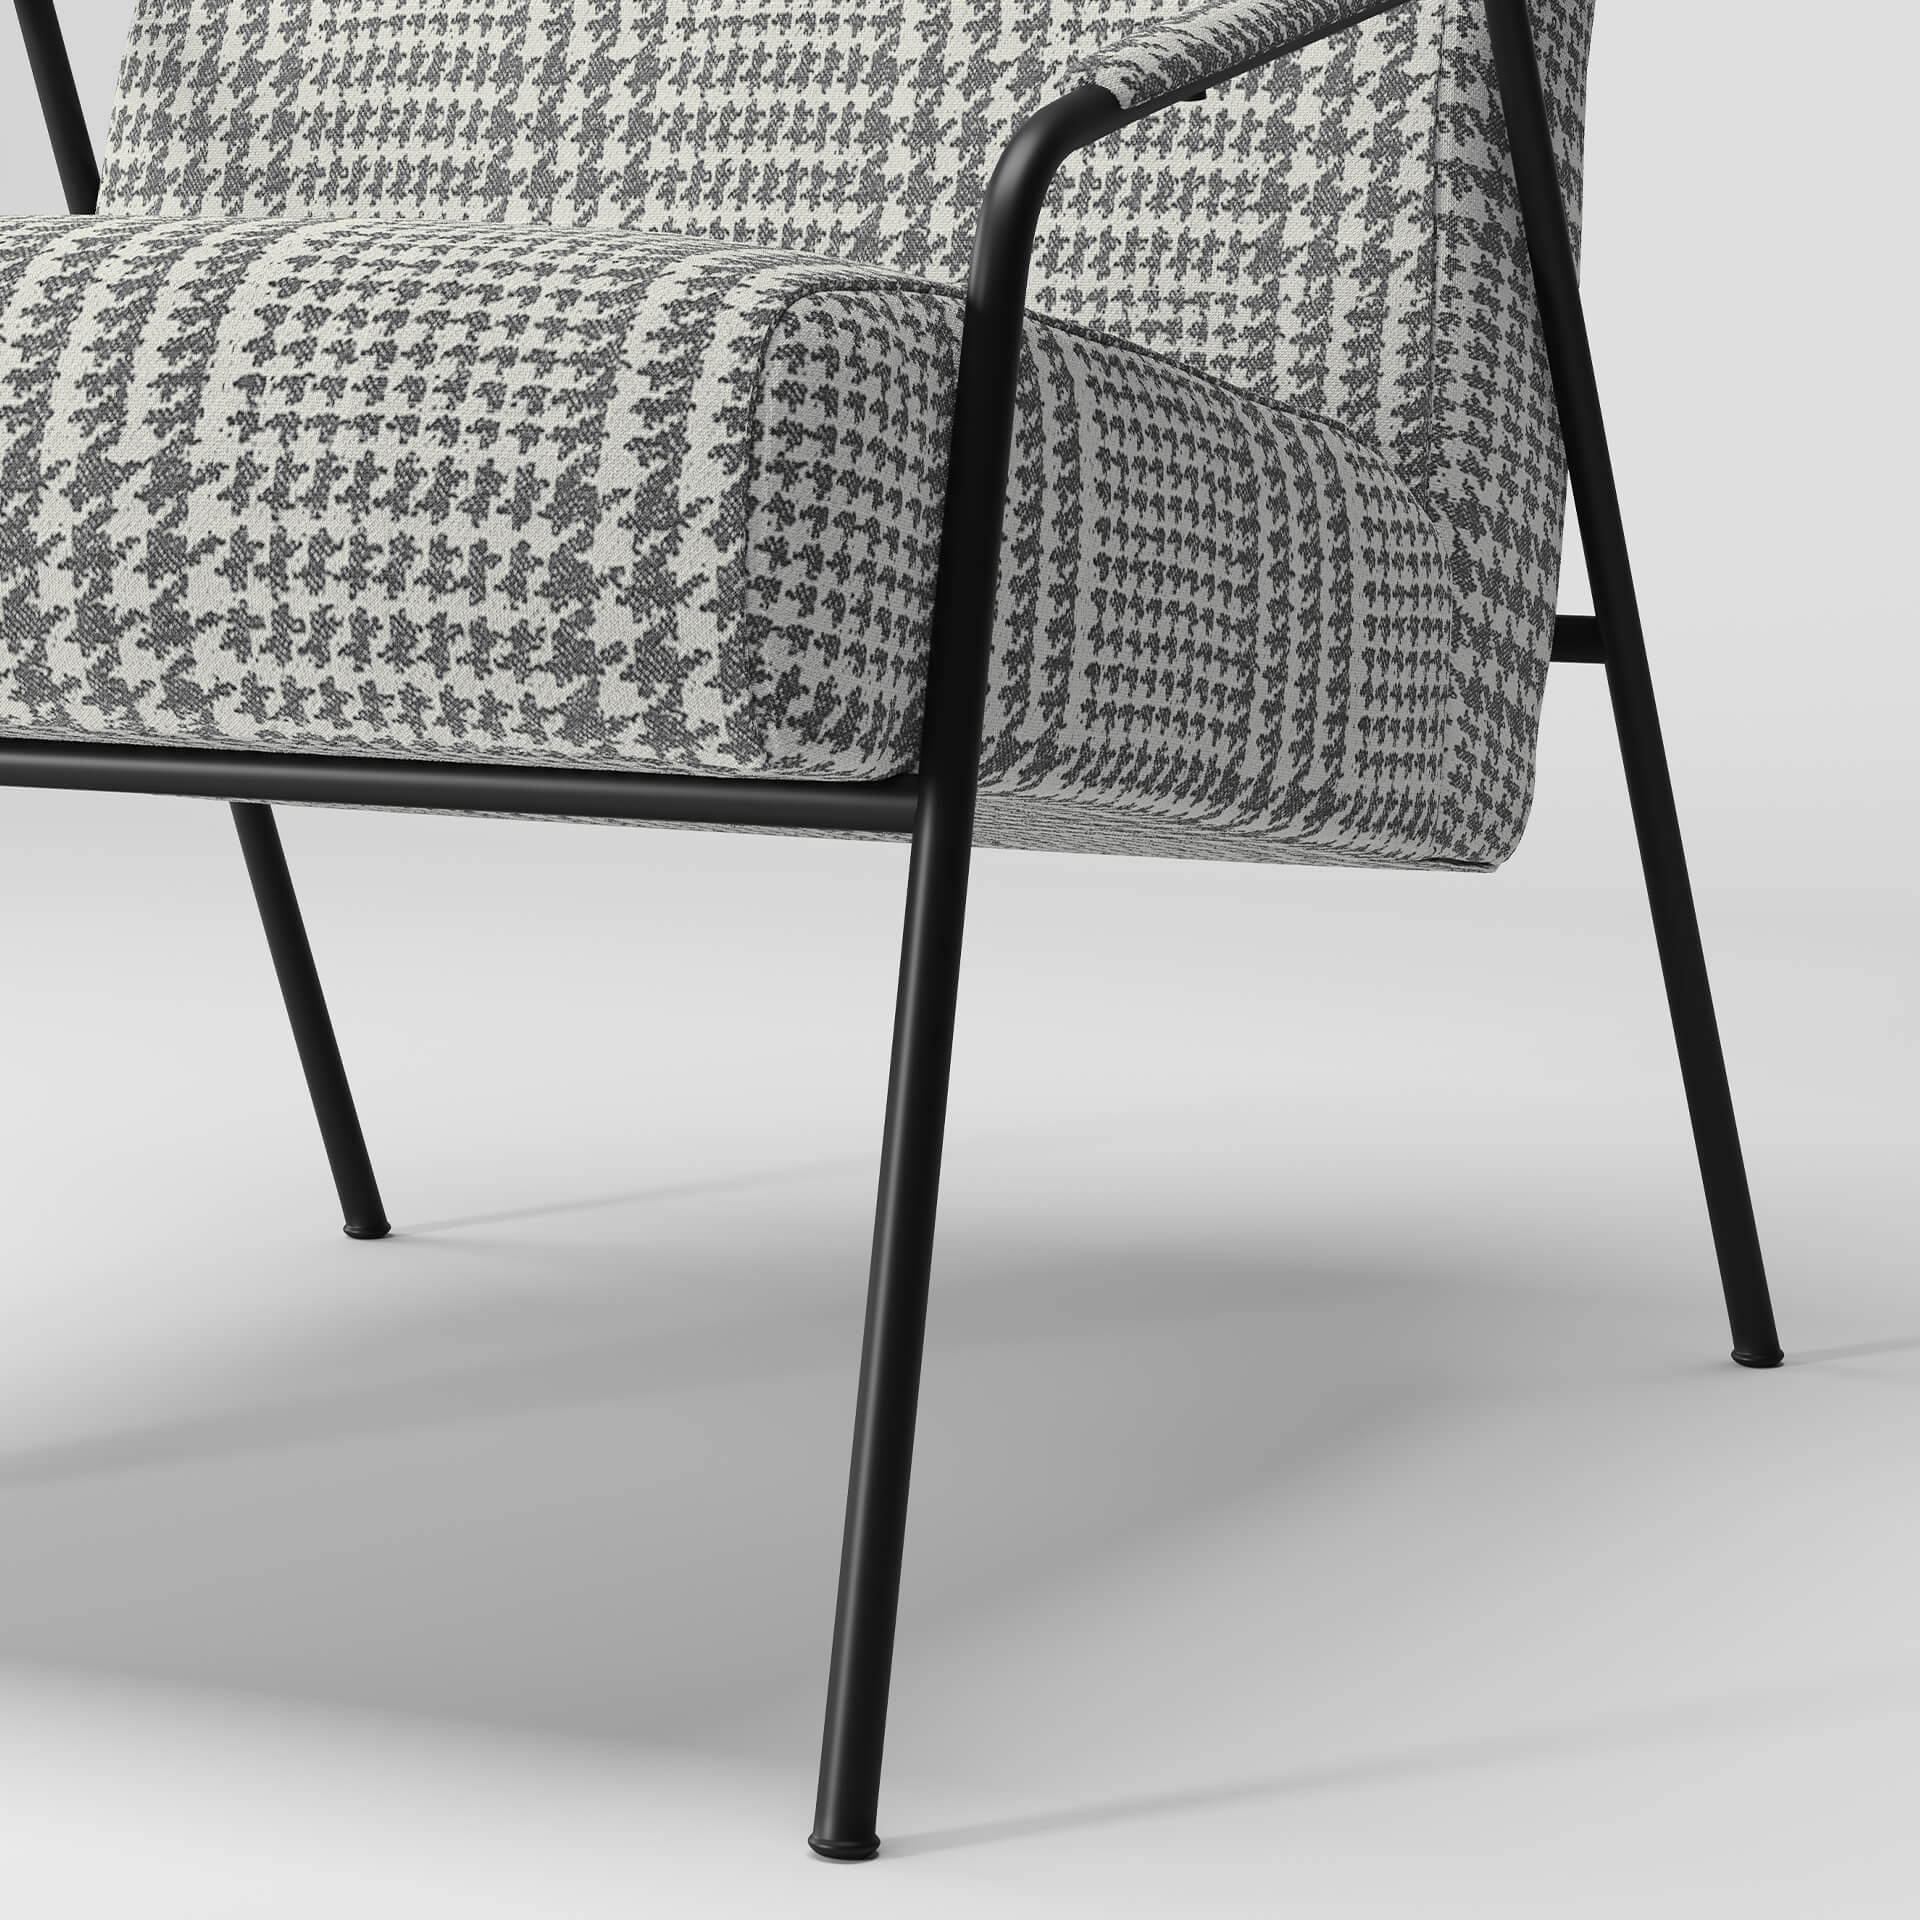 Close-Up 3D Render of Patterned Gray Chair